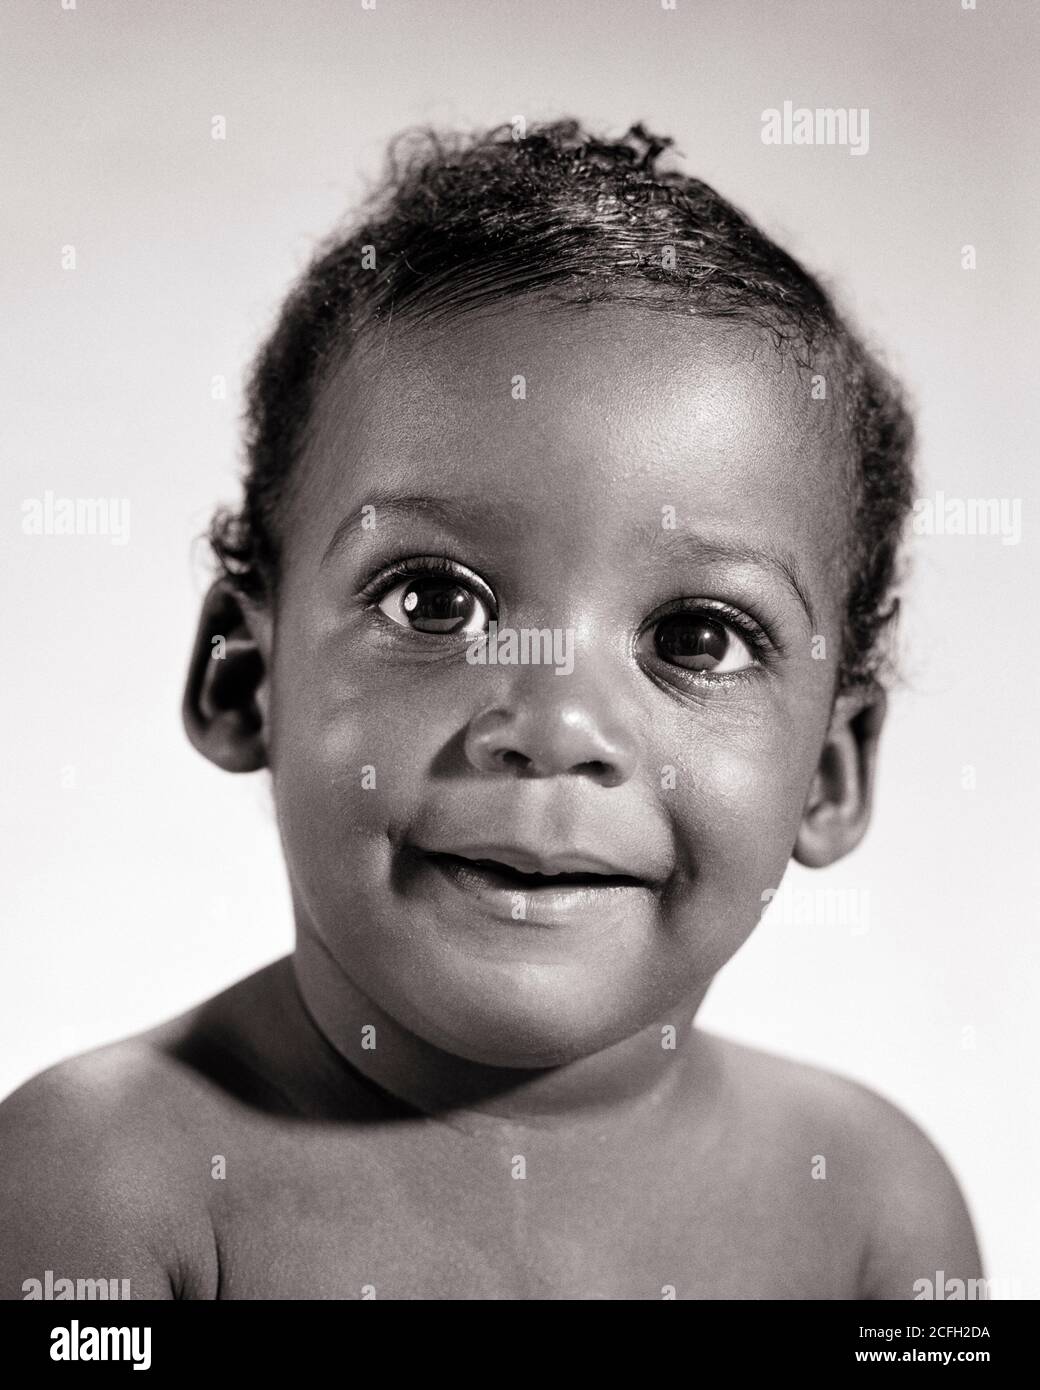 1960s PORTRAIT SWEET AFRICAN-AMERICAN BABY BOY WITH BIG EYES SMILING LOOKING AT CAMERA - n2325 HAR001 HARS B&W EYE CONTACT BUG-EYED HAPPINESS HEAD AND SHOULDERS CHEERFUL DISCOVERY AFRICAN-AMERICANS AFRICAN-AMERICAN BLACK ETHNICITY SMILES JOYFUL BABY BOY PLEASANT WIDE-EYED AGREEABLE CHARMING GROWTH JUVENILES LOVABLE PLEASING ADORABLE APPEALING BLACK AND WHITE HAR001 OLD FASHIONED AFRICAN AMERICANS Stock Photo